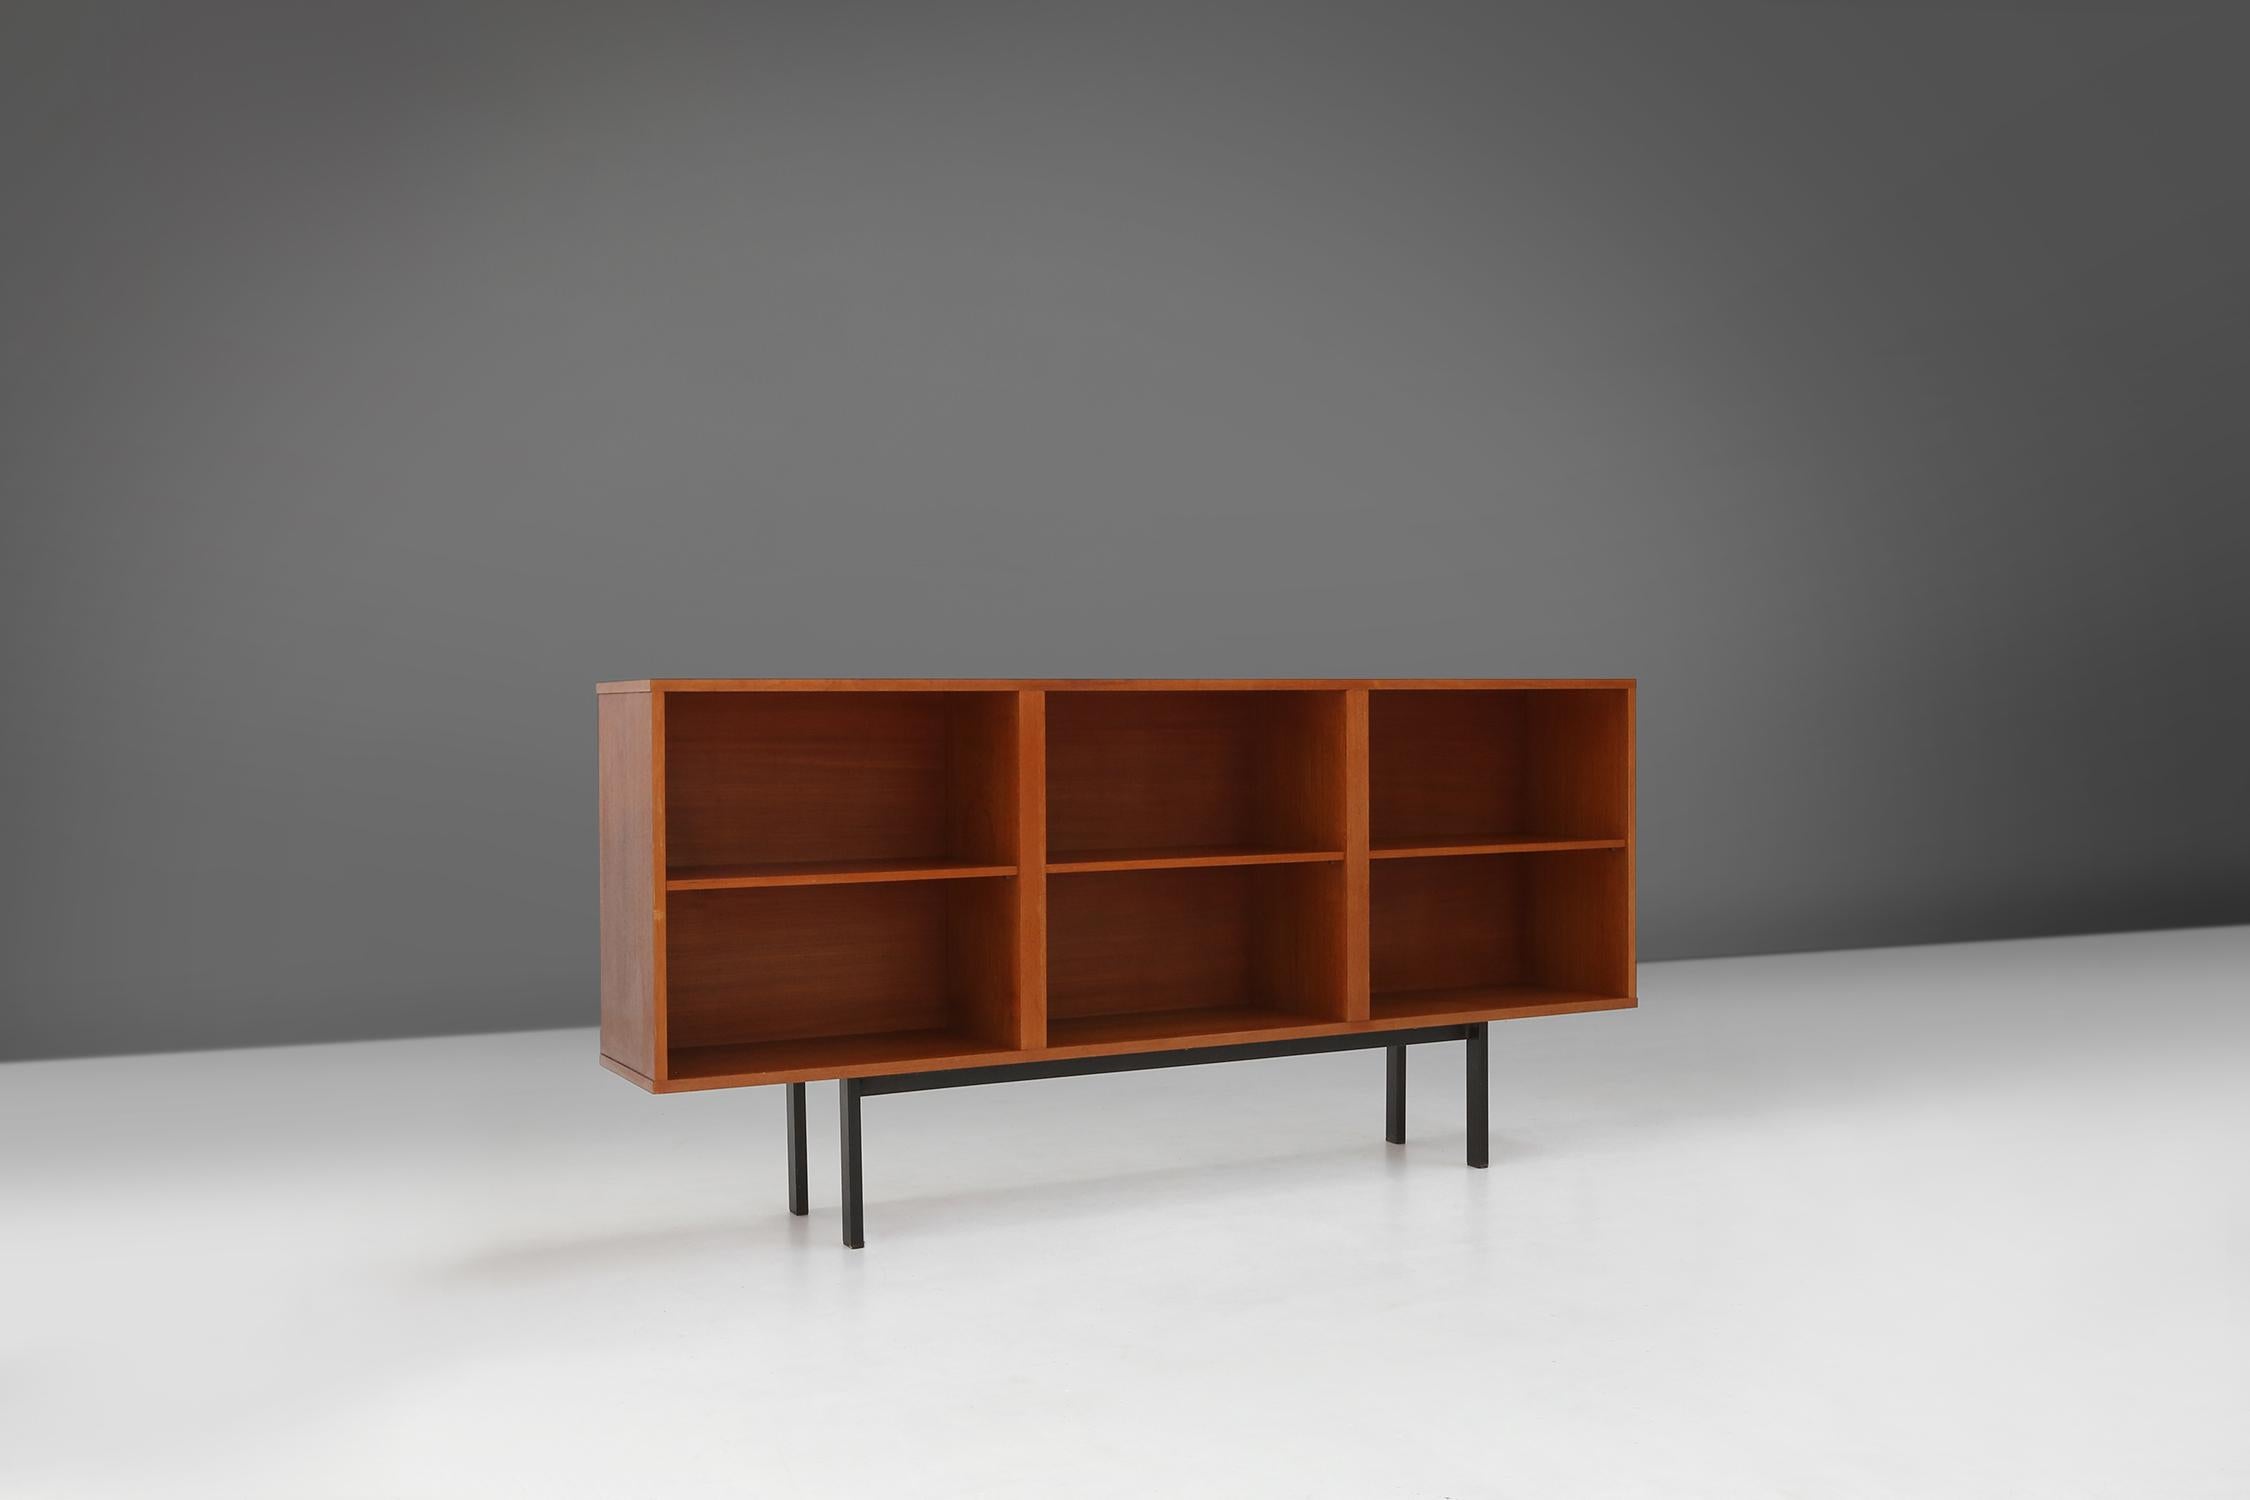 
Made in Belgium in the 1960s, this mid-century sideboard combine clean lines, organic shapes and functional beauty. The teak wood is a durable and natural material, which has a warm and elegant look. The metal base gives a nice contrast to the